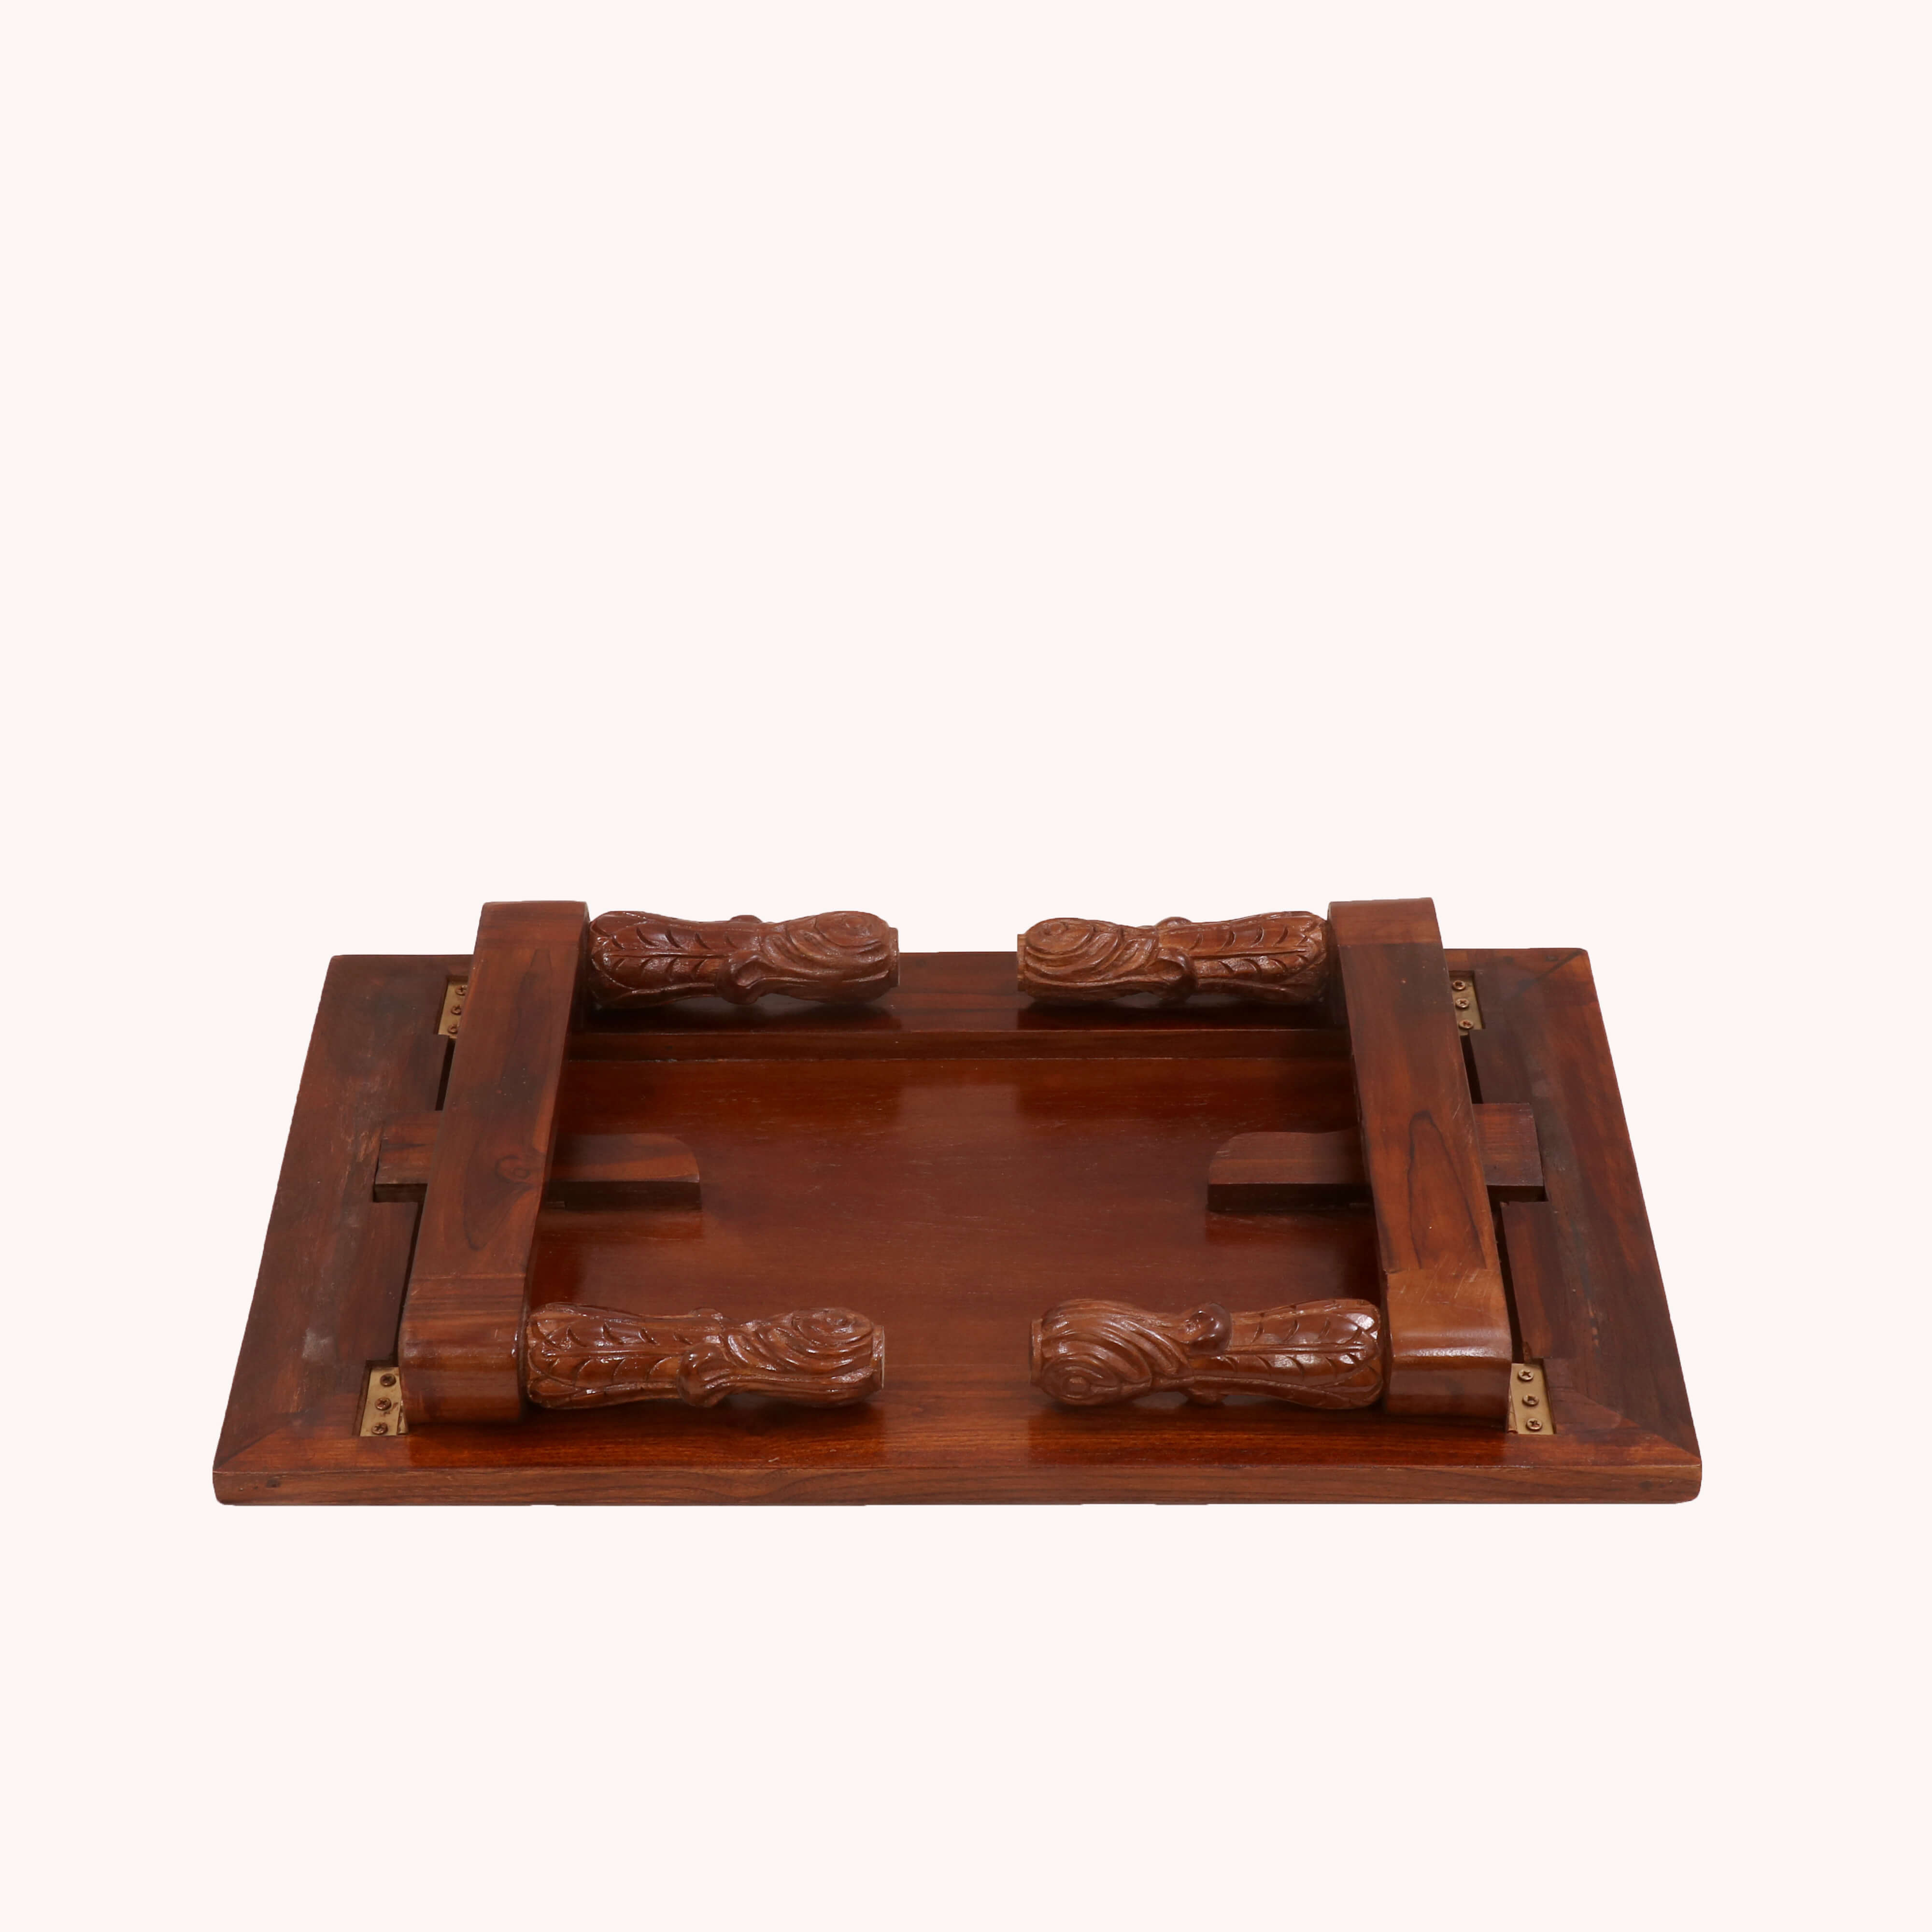 Brown Tone Carved Legs Wooden Folding Table Bajot